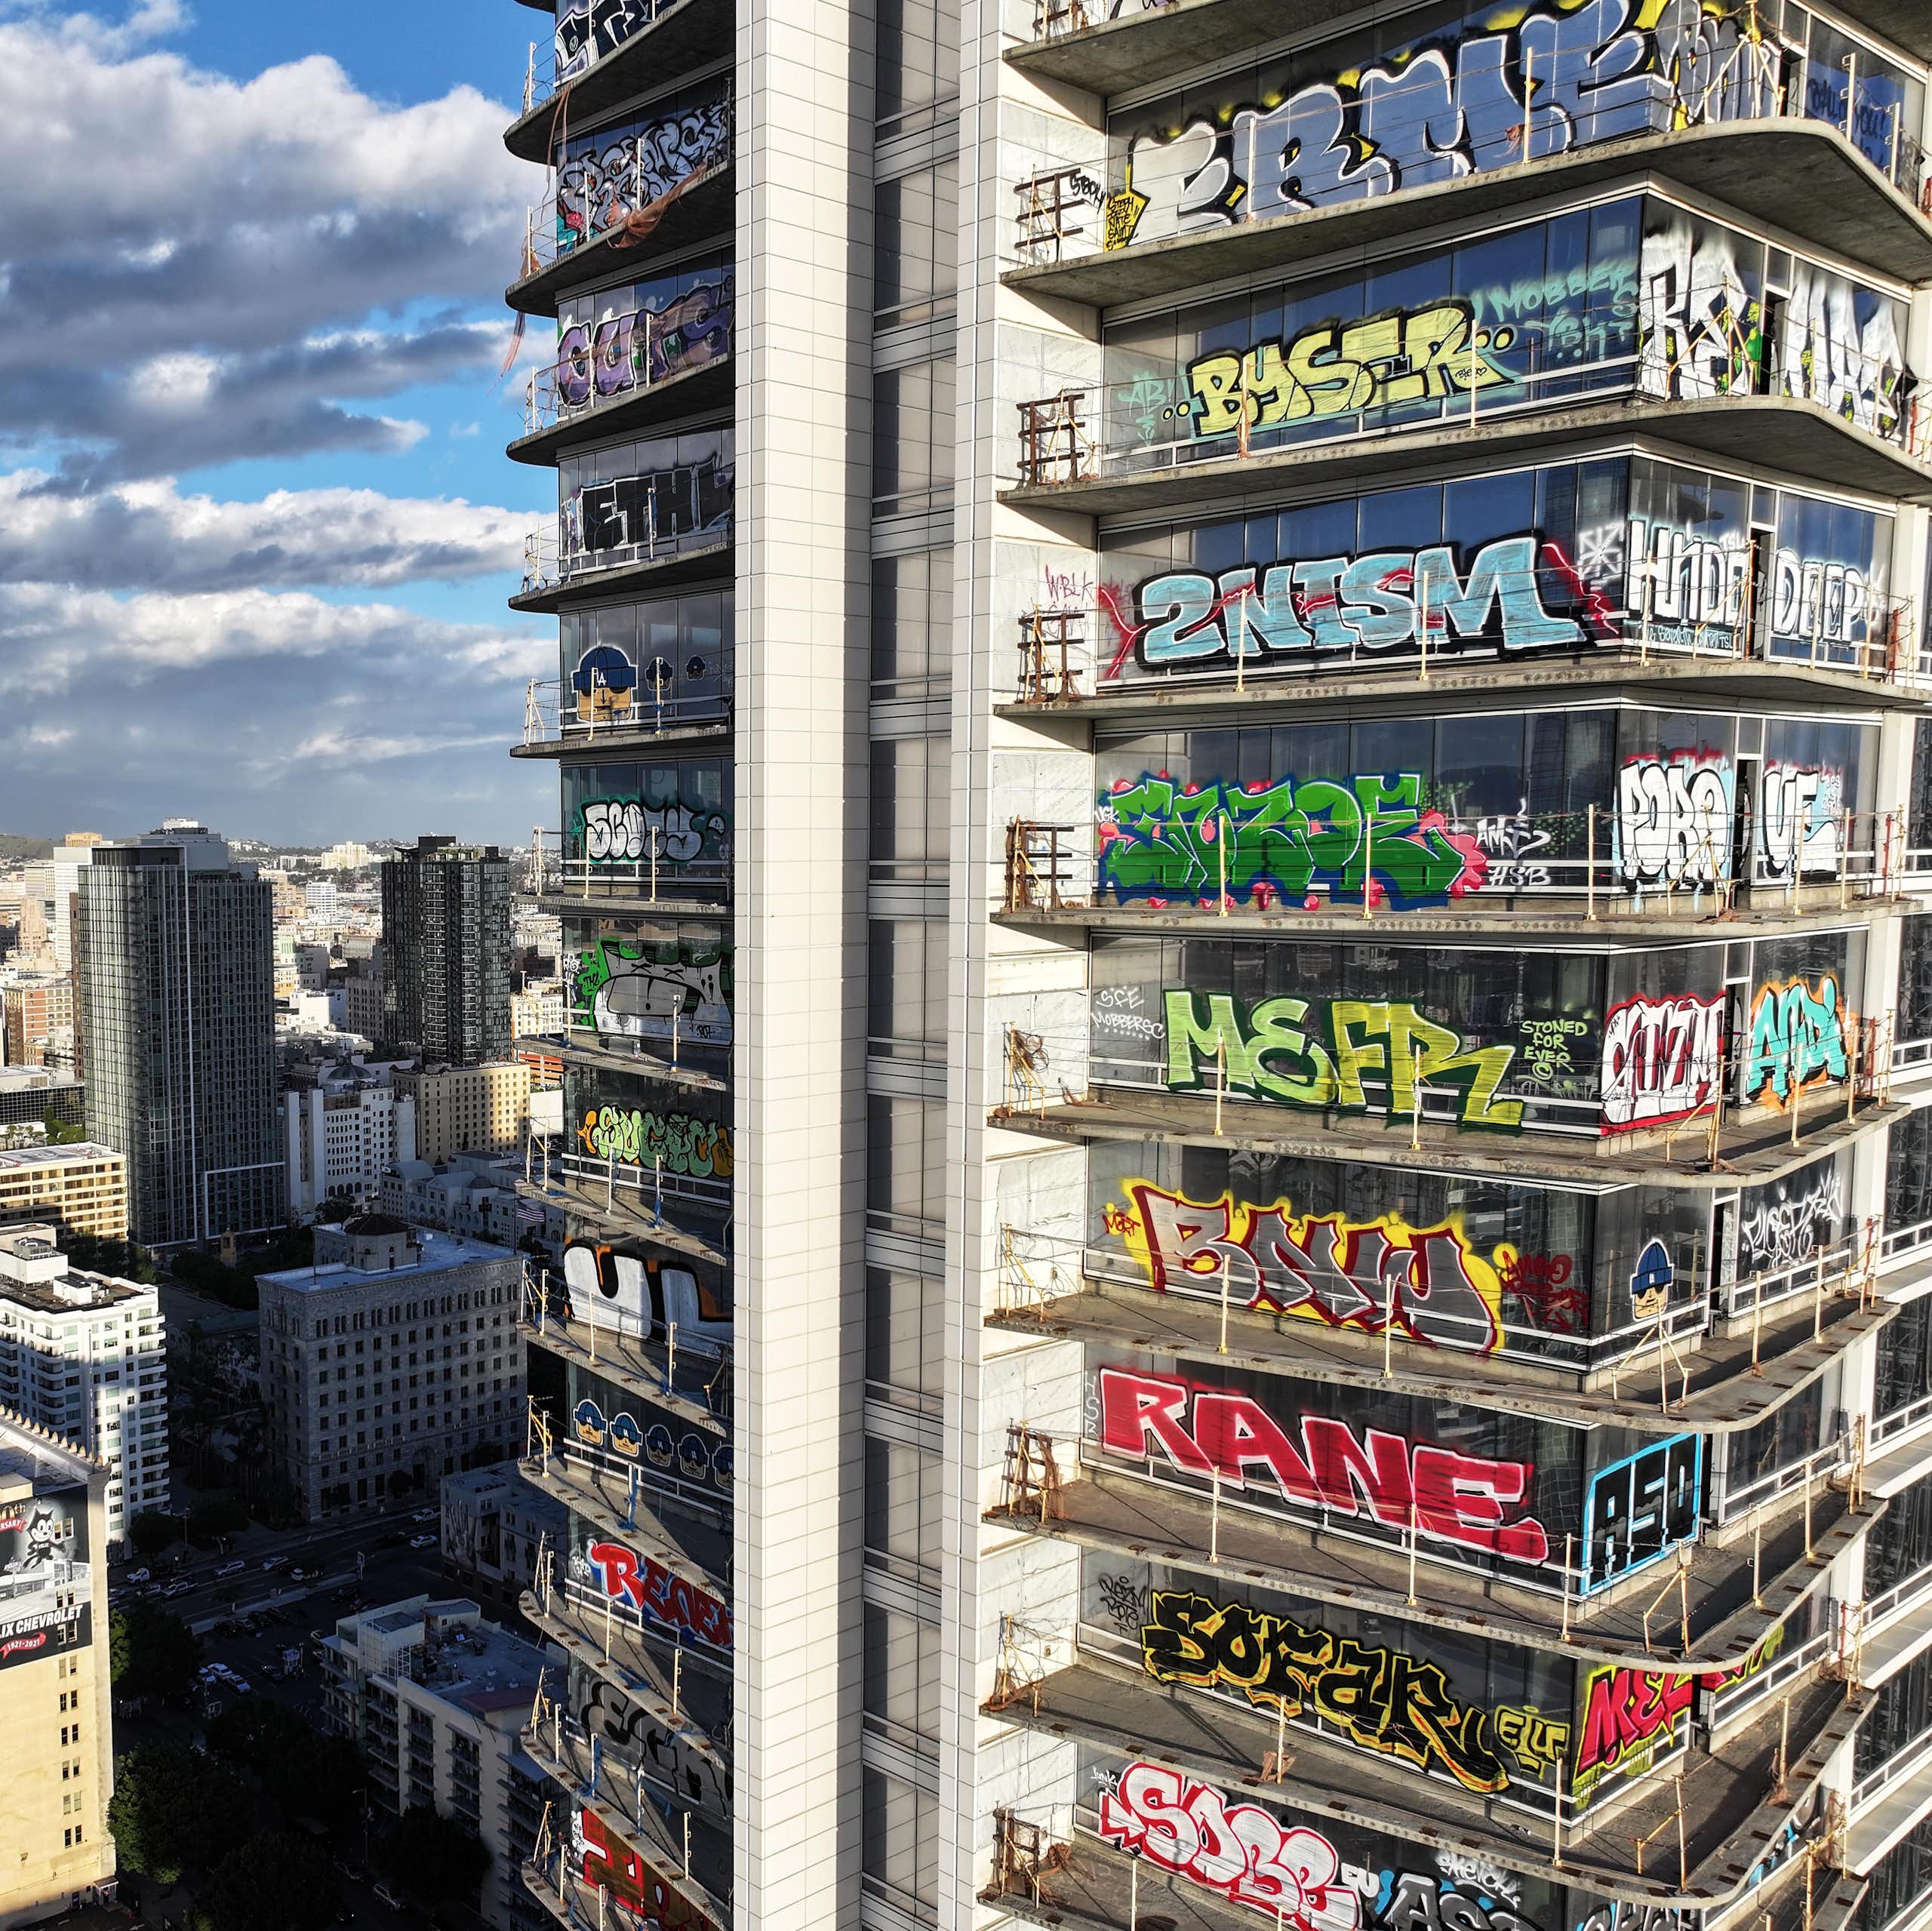 An aerial view of colorful graffiti on an unfinished skyscraper.